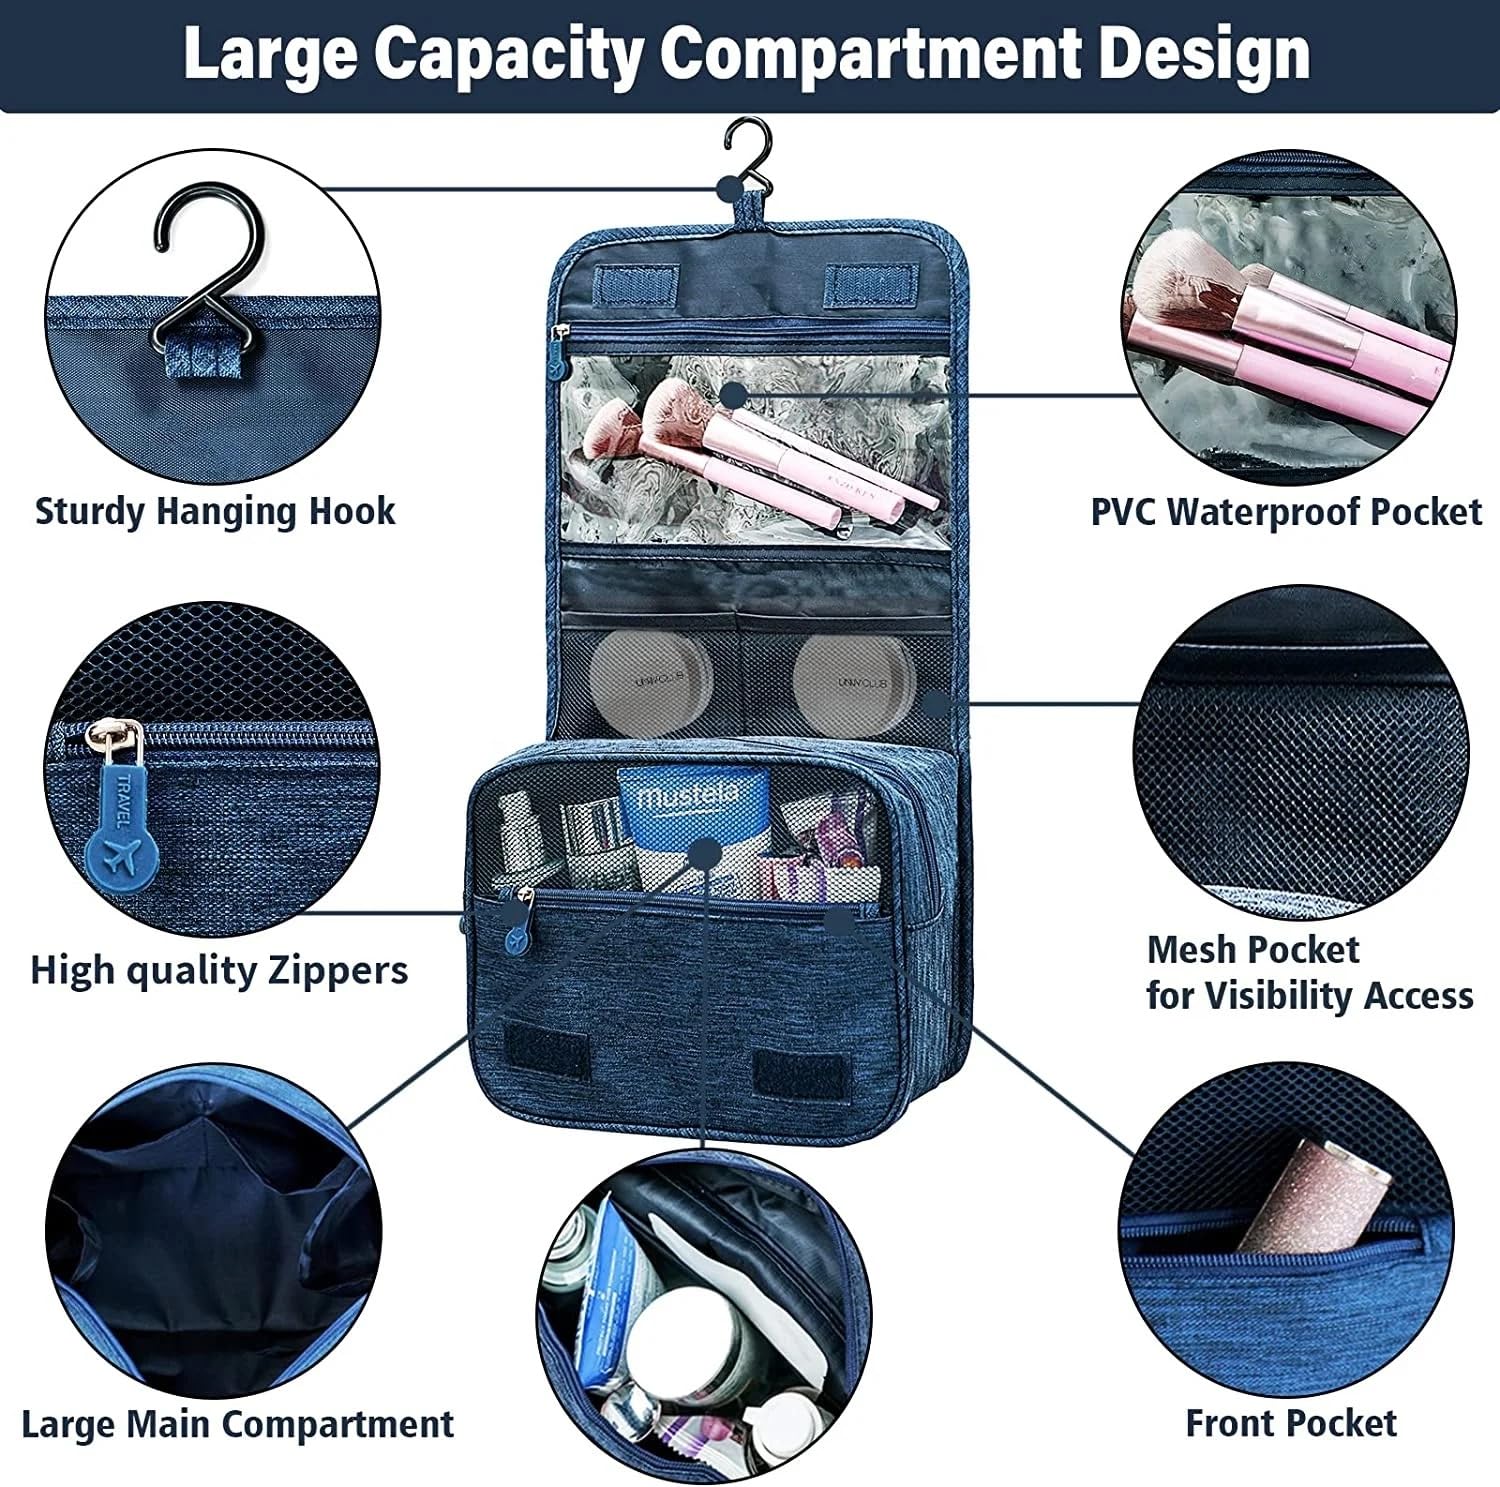 VIO Travel Toiletry Bag Organizer, Waterproof Multiple Compartment Hanging Cosmetics, Shaving, Grooming Storage Bag, Multi-pocket Portable Makeup Organizer Bag with Hook for Men and Women (Black)